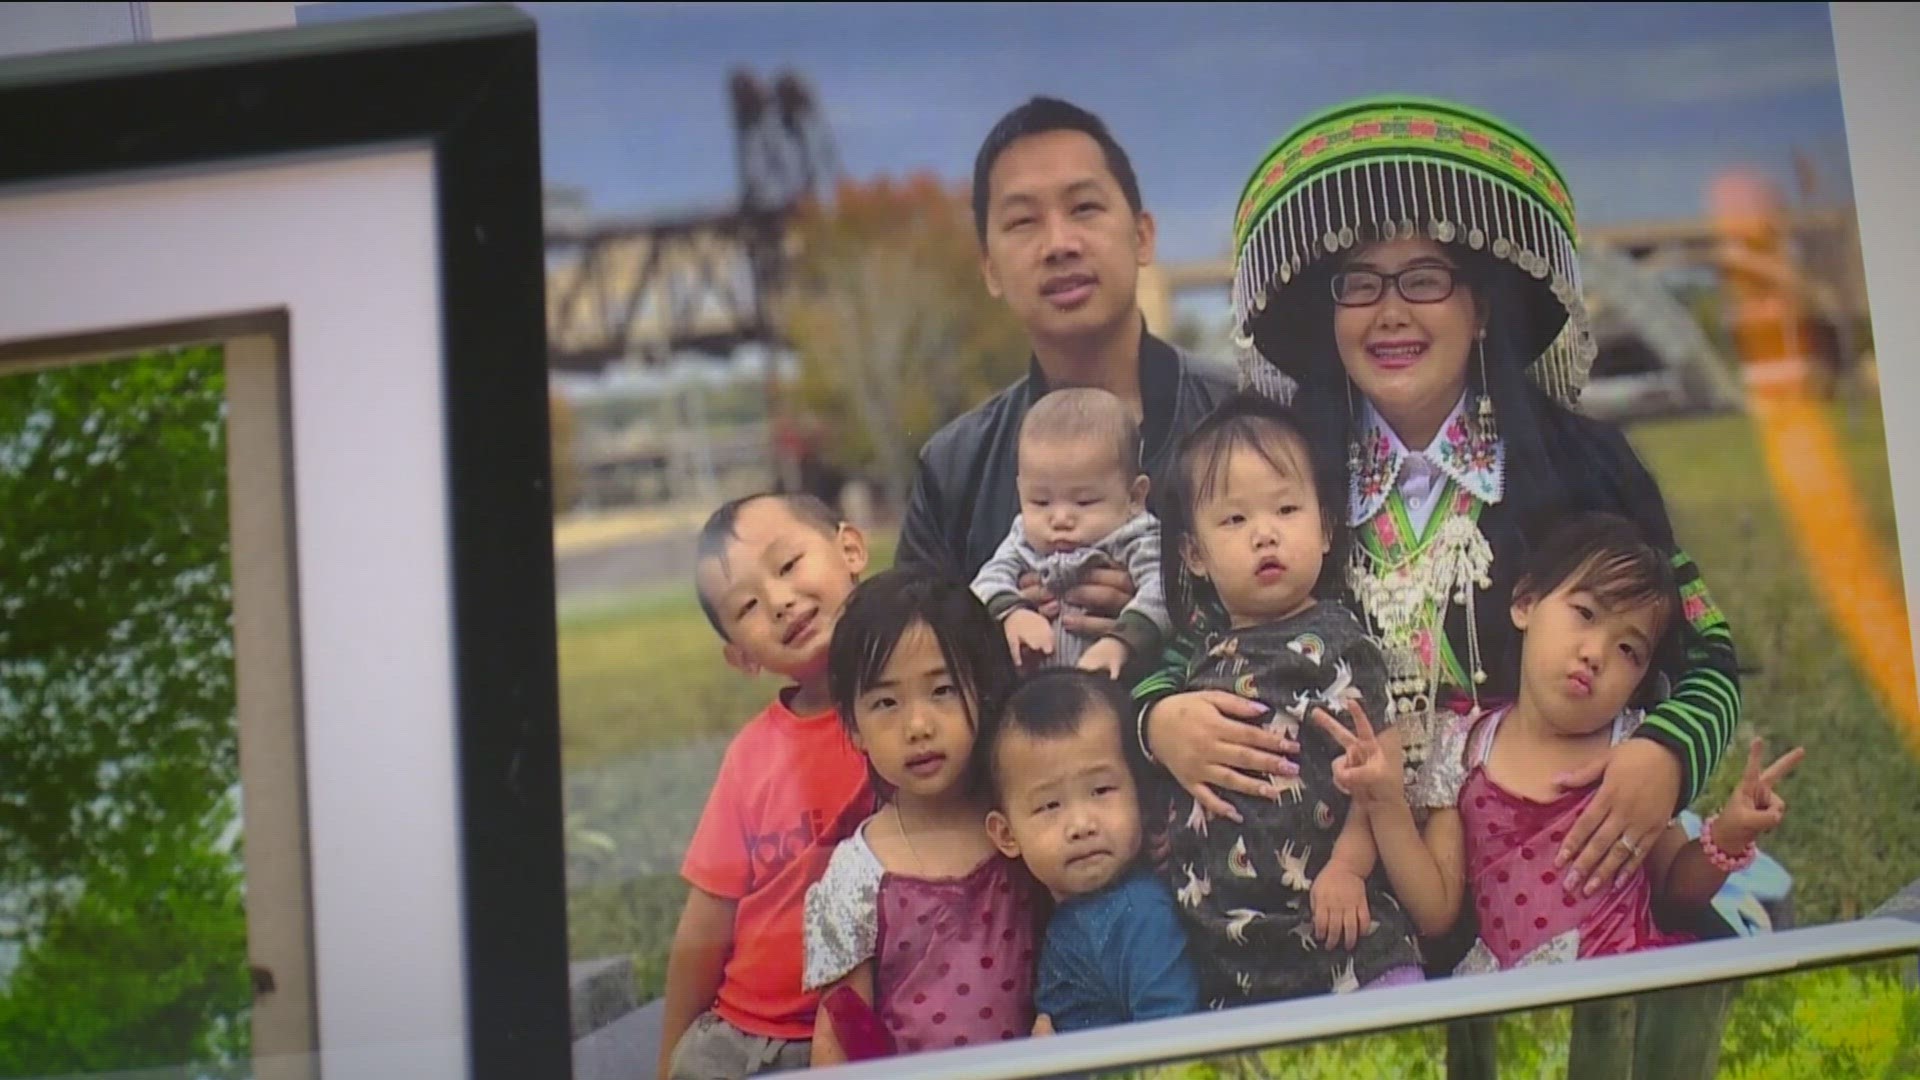 Muaj Cag Txuj Vang was one of four siblings killed after a St. Paul house fire on January 3.